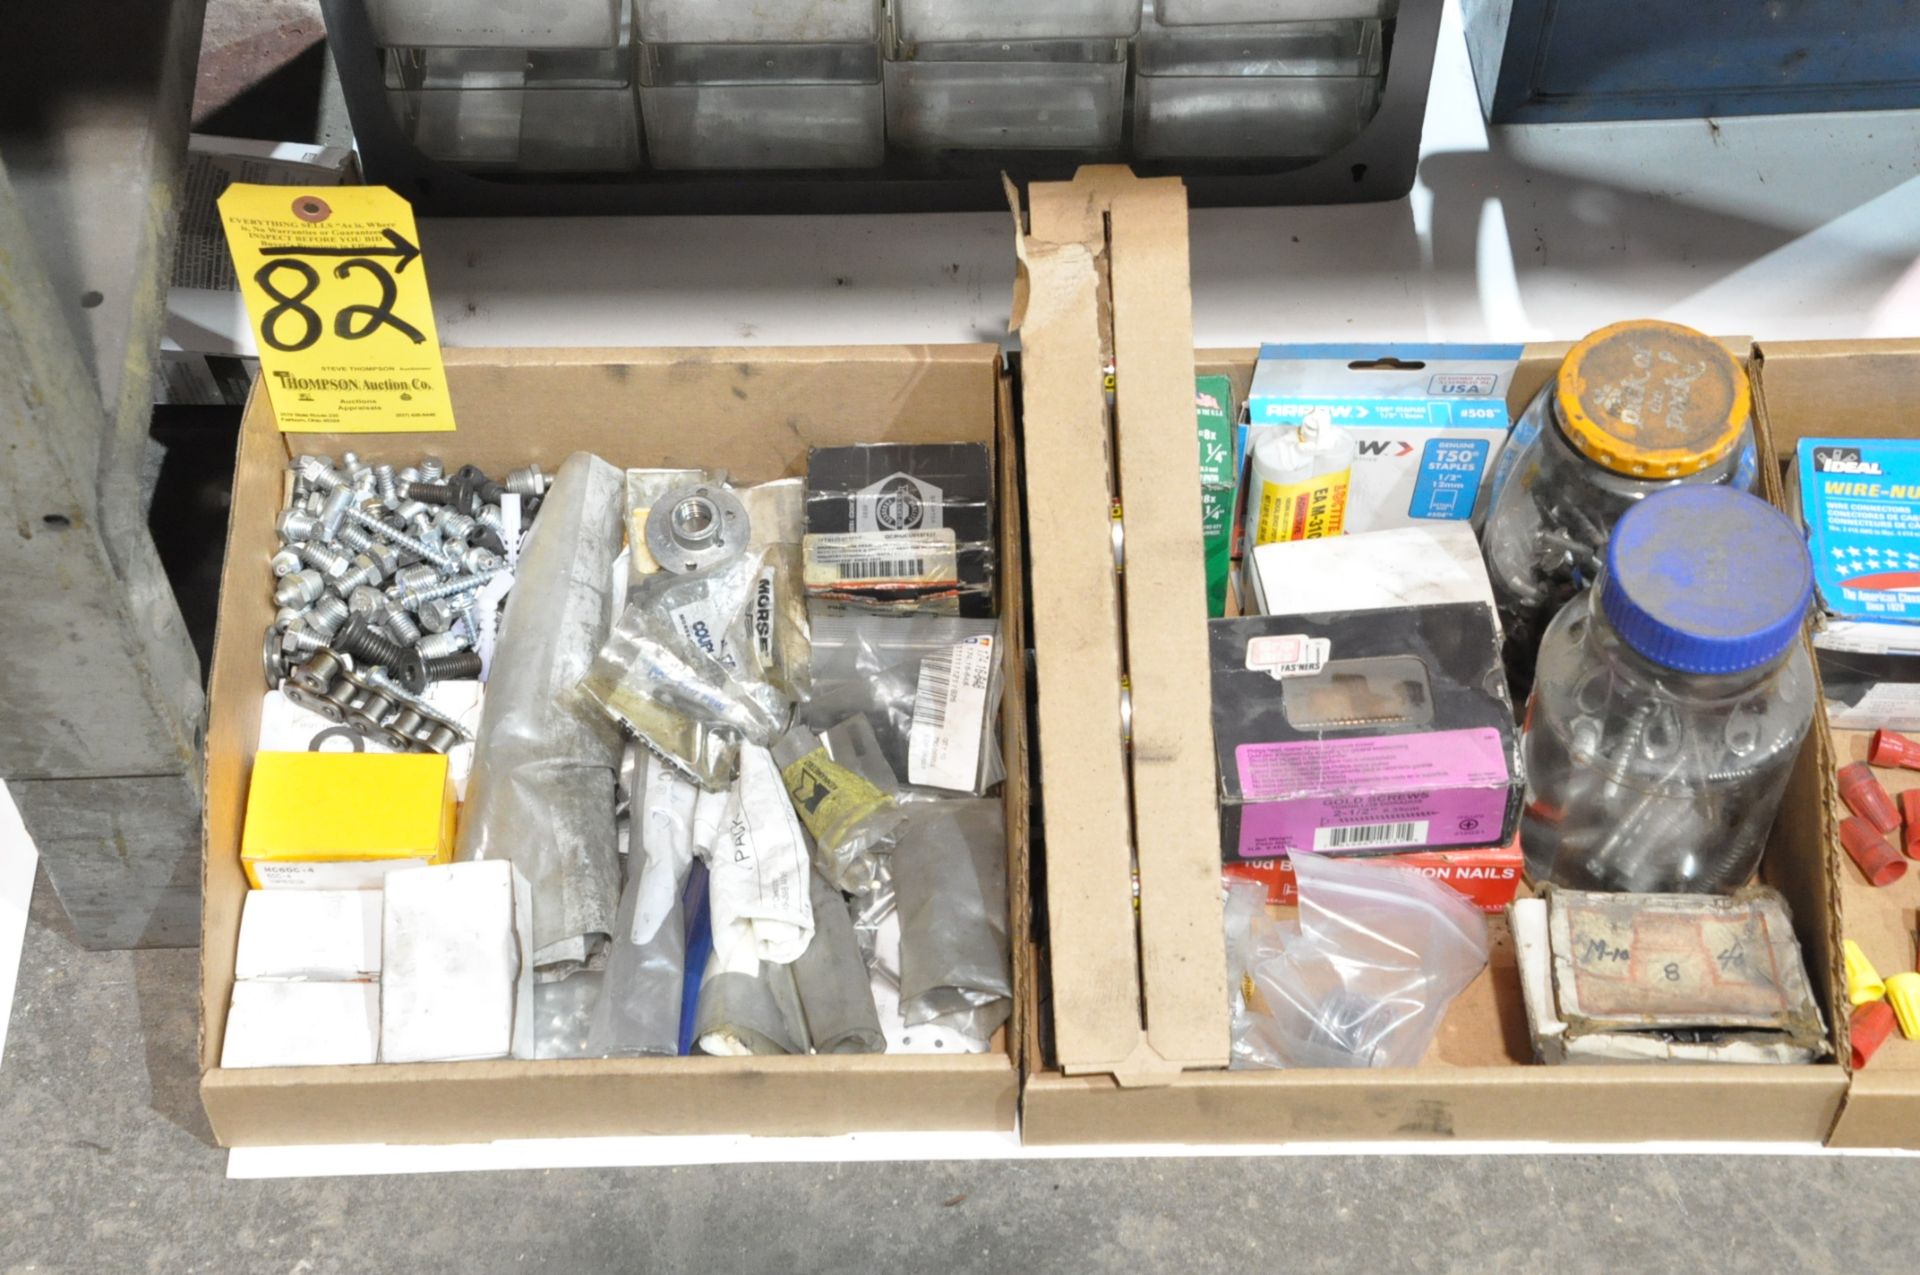 Lot-Screws, Nuts, Bolts, Wire Connectors, etc. in (7) Boxes on Floor Under (1) Bench - Image 2 of 3